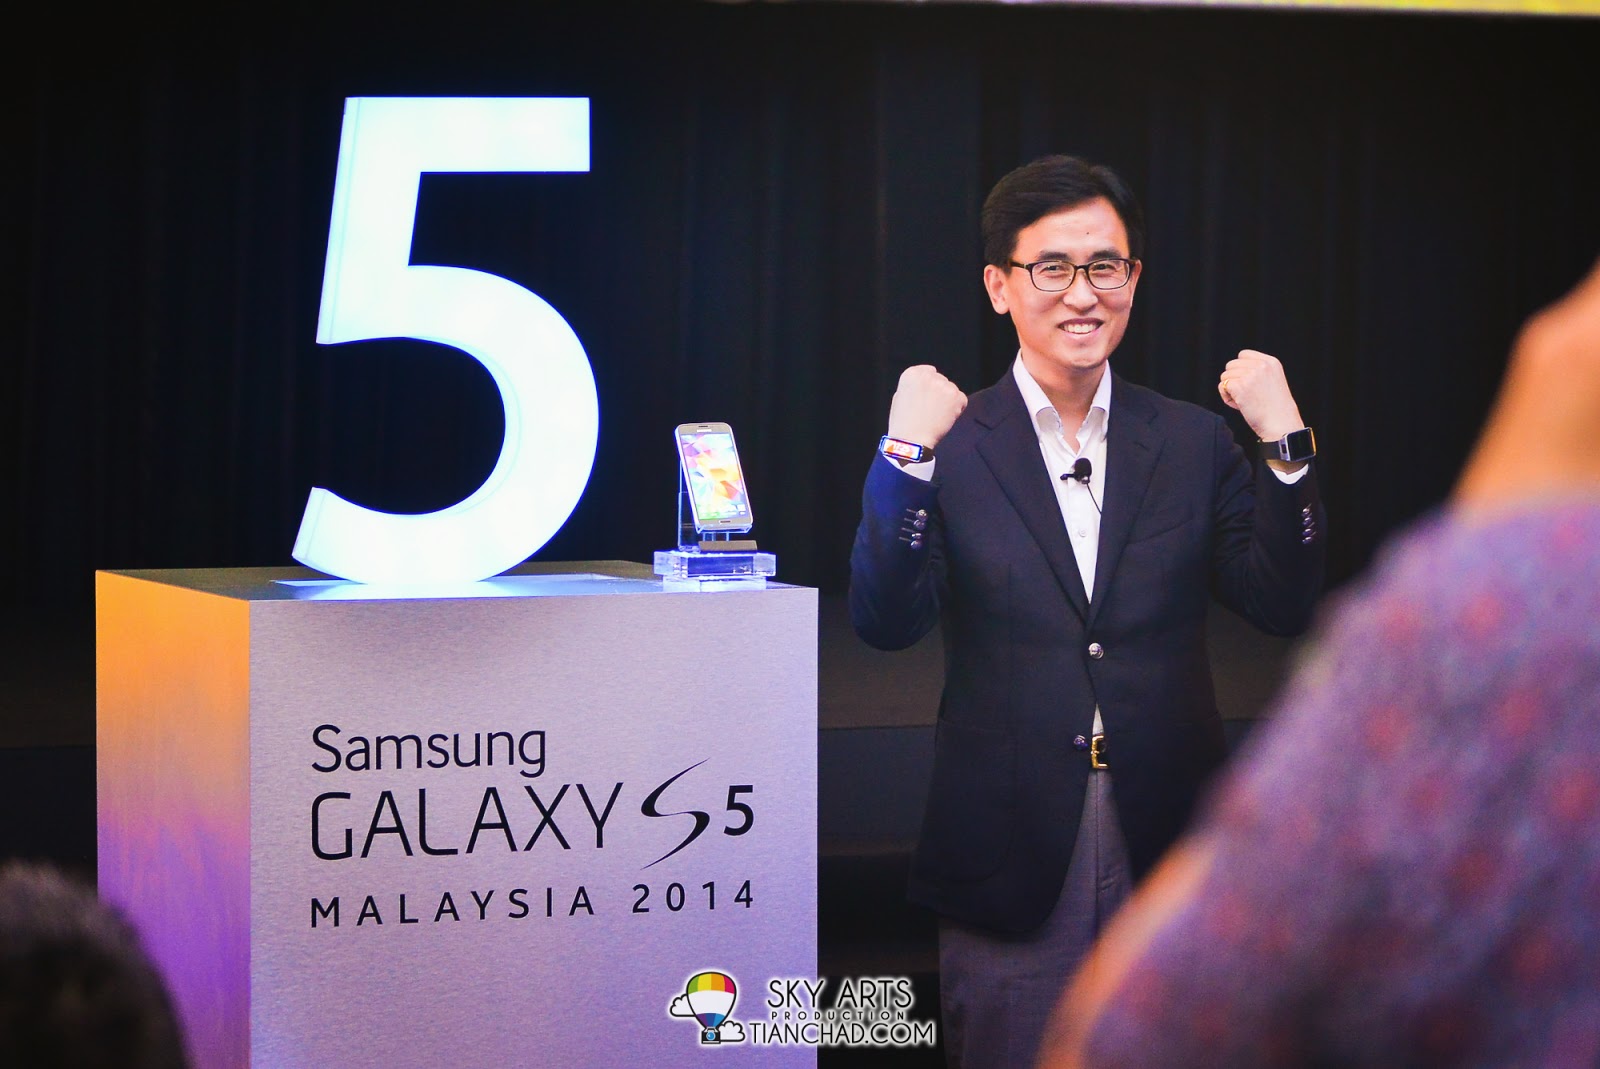 Samsung GALAXY S5, Samsung Gear 2 and Samsung Fit Launch in Malaysia 2014